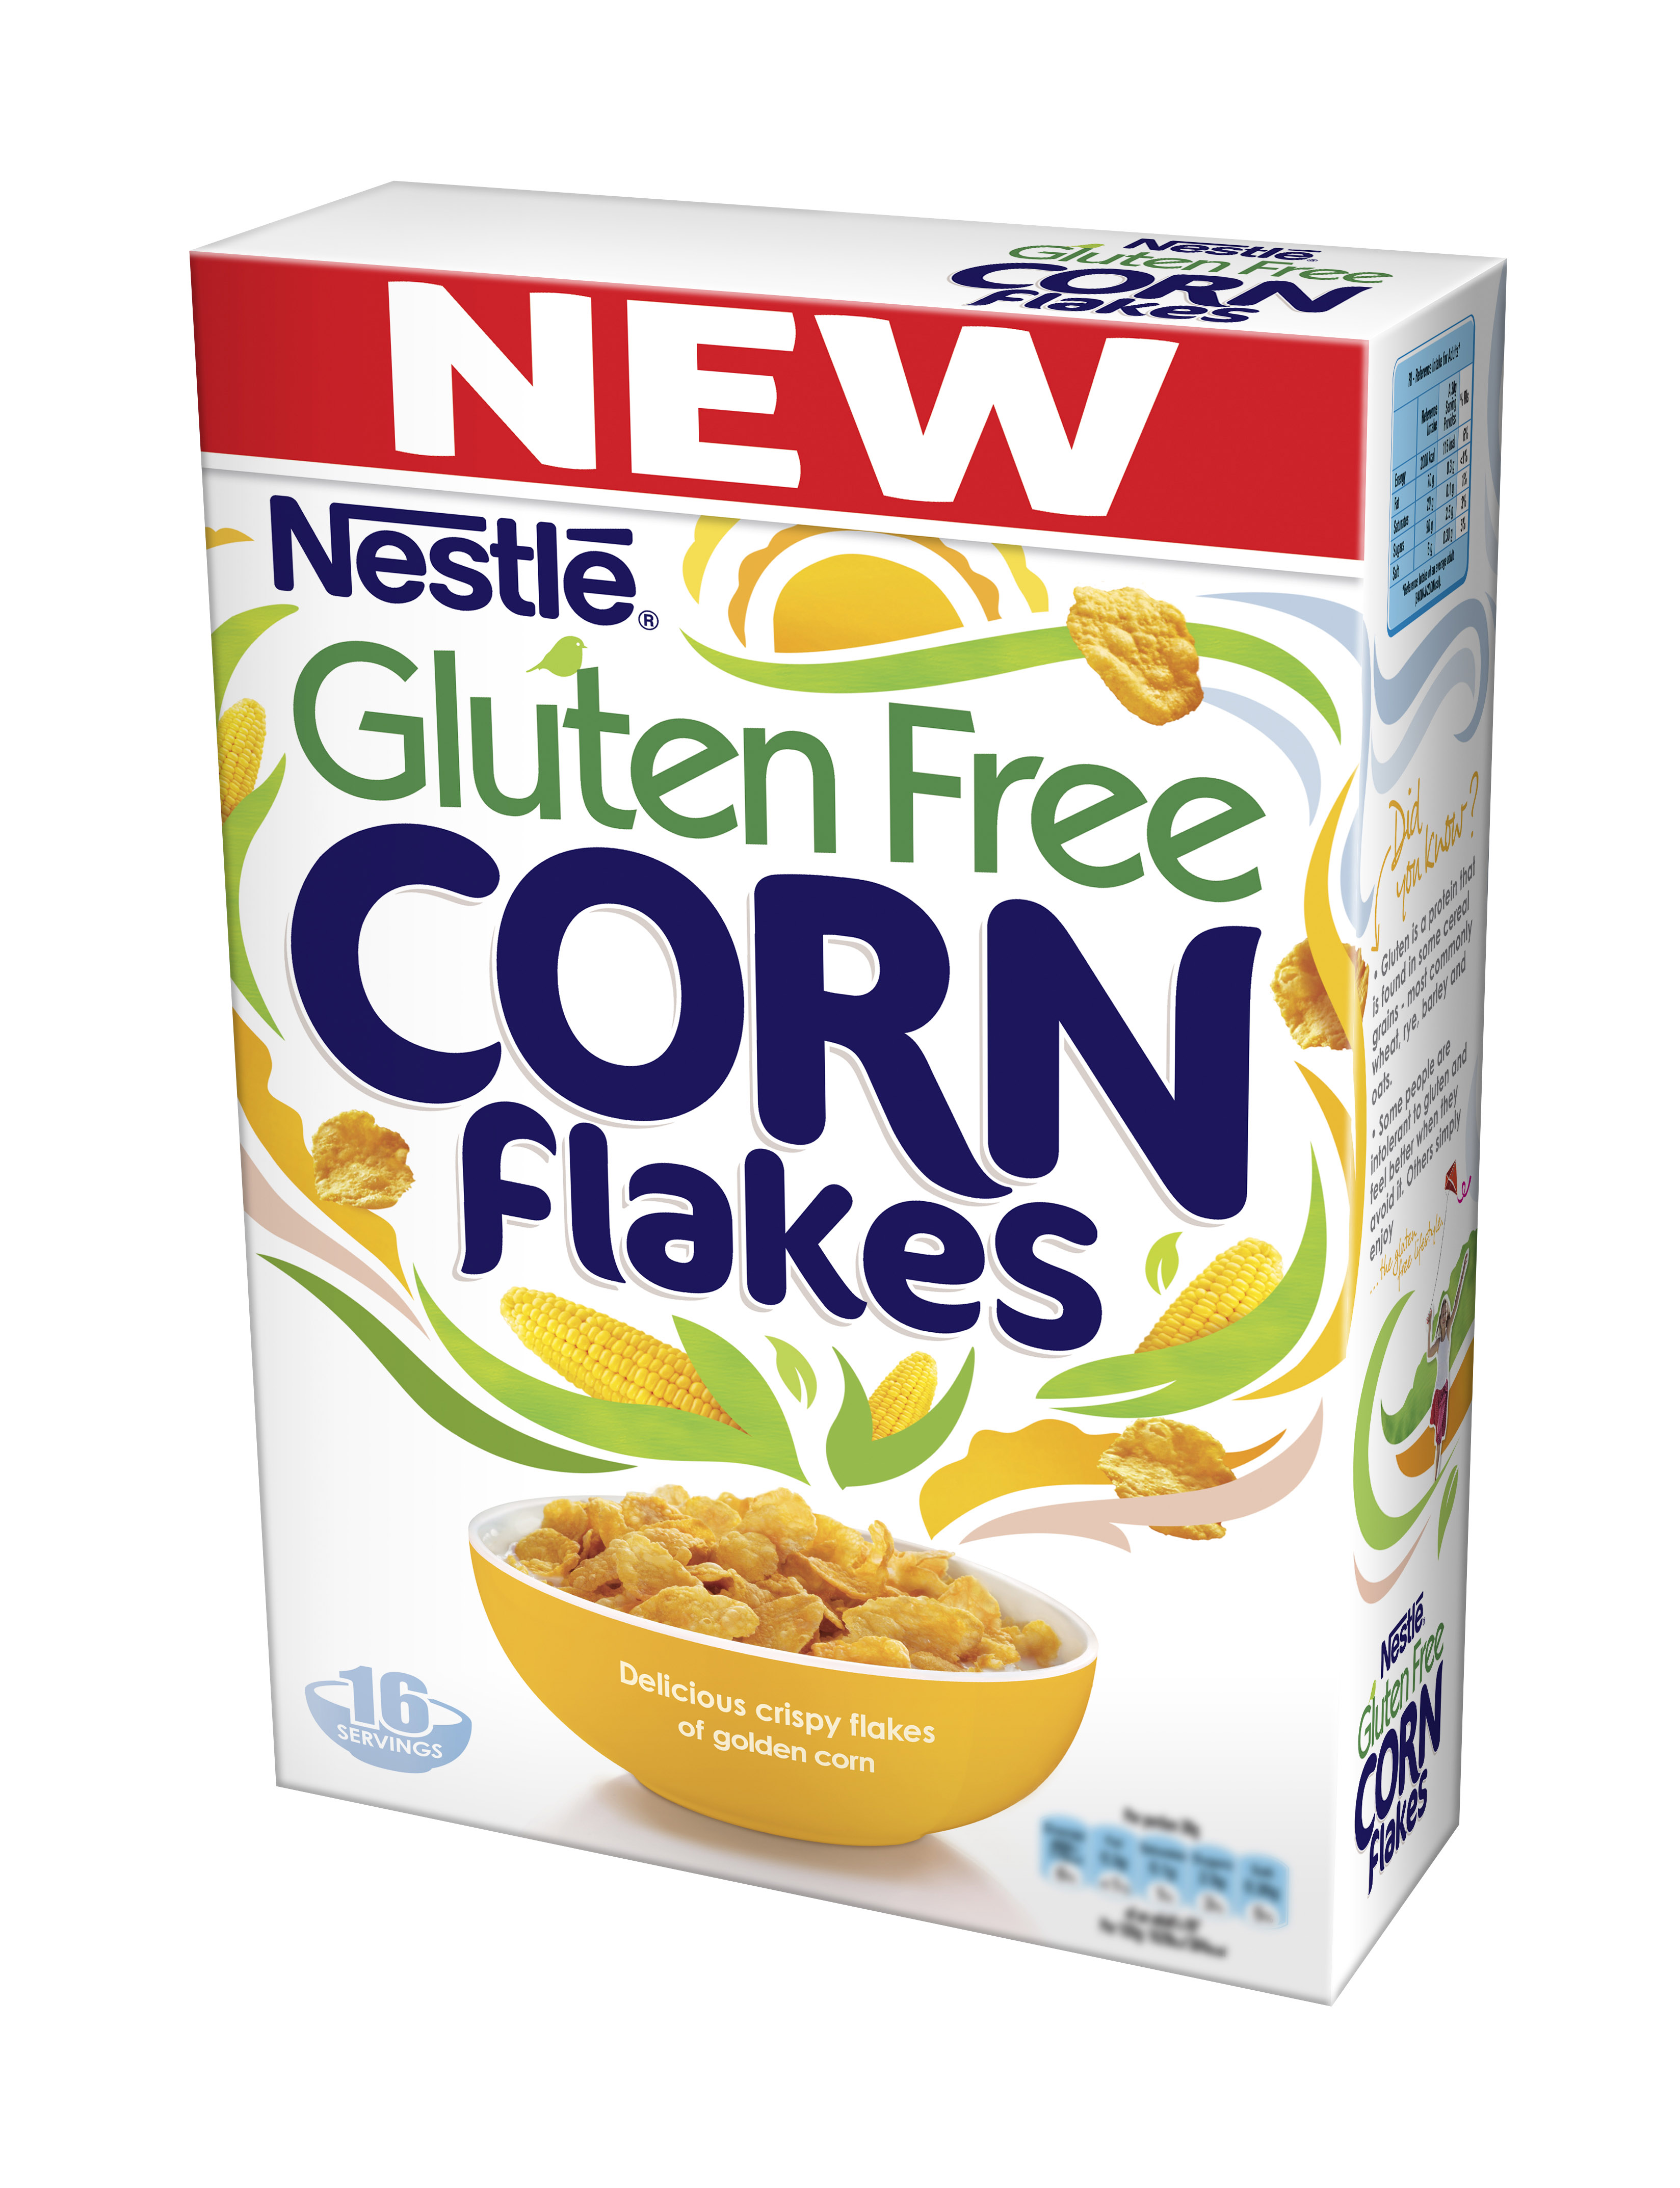 Glutenfree goes mainstream with breakthrough cereal launch by Nestlé